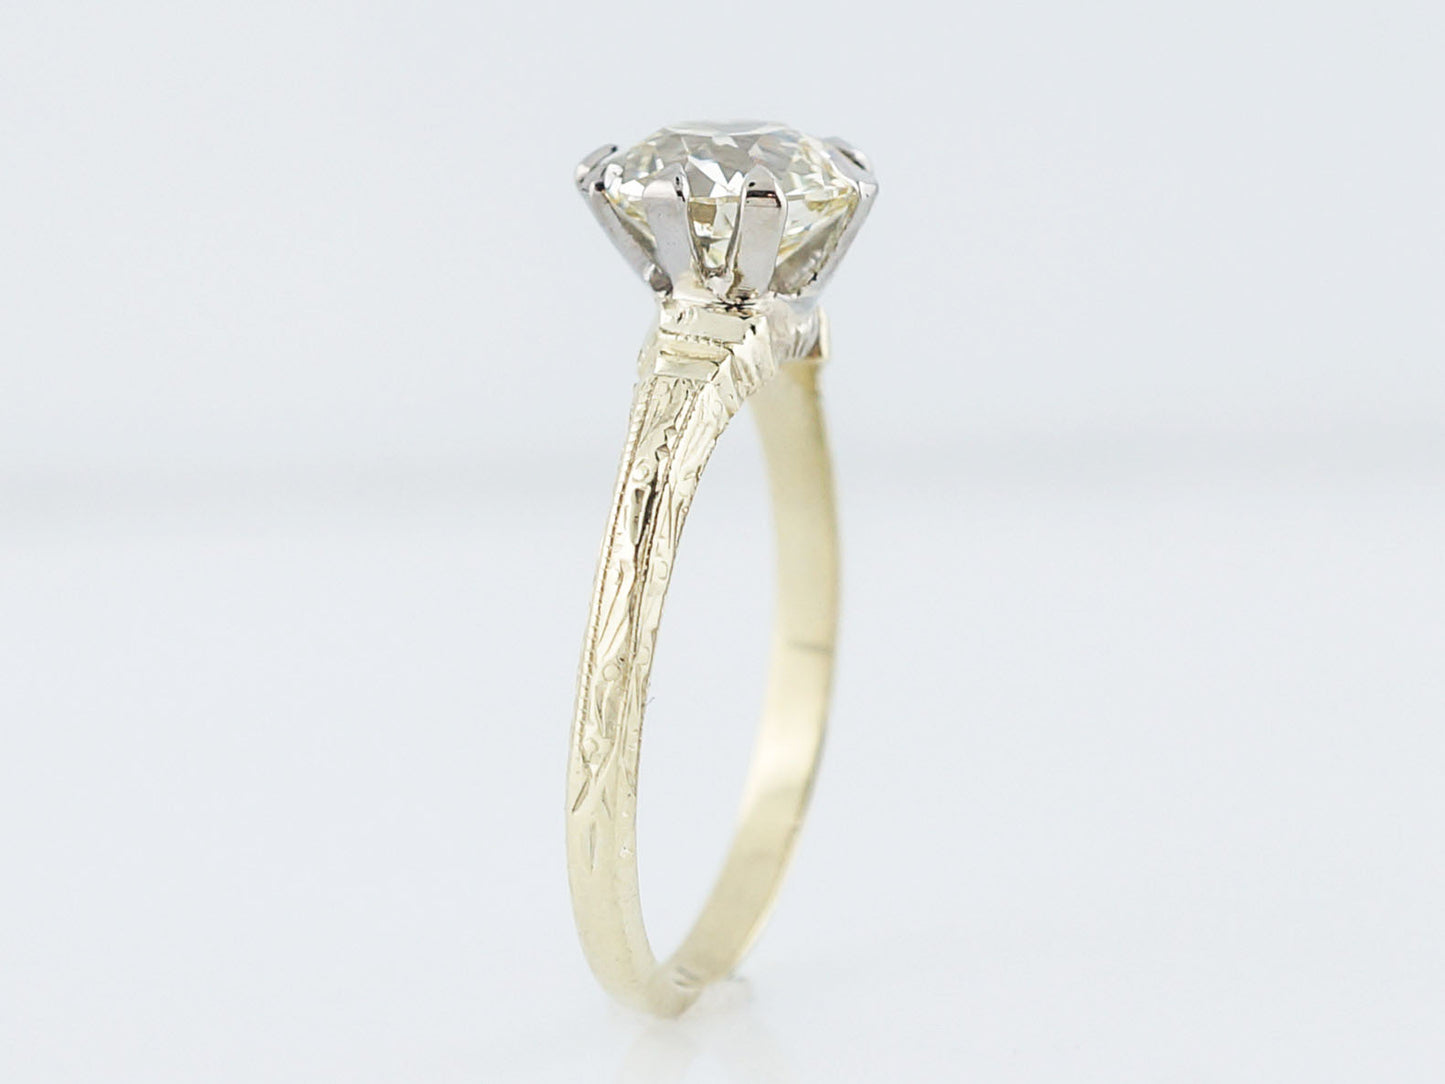 Antique Engagement Ring Art Deco 1.44 Old European Cut Diamond in 14k Yellow Gold